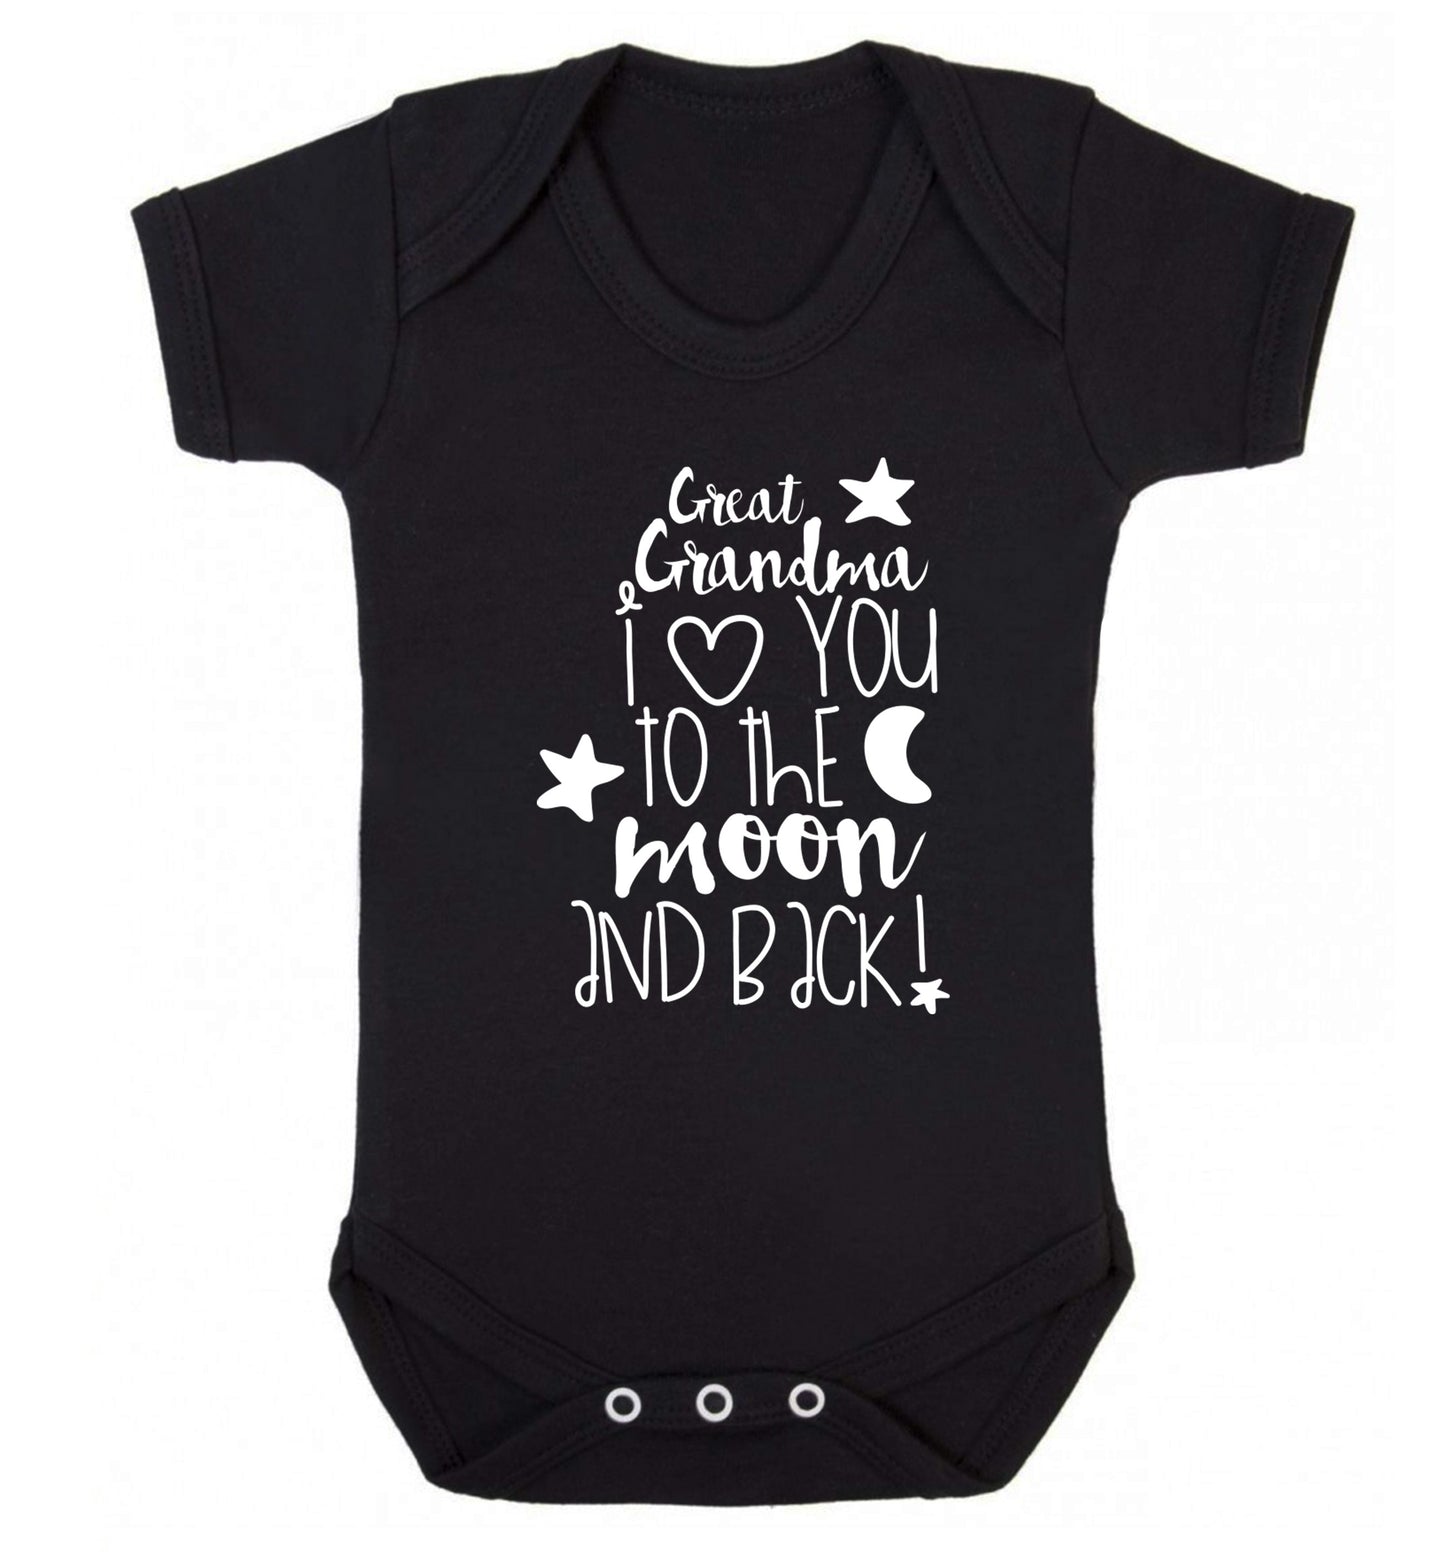 Great Grandma I love you to the moon and back Baby Vest black 18-24 months